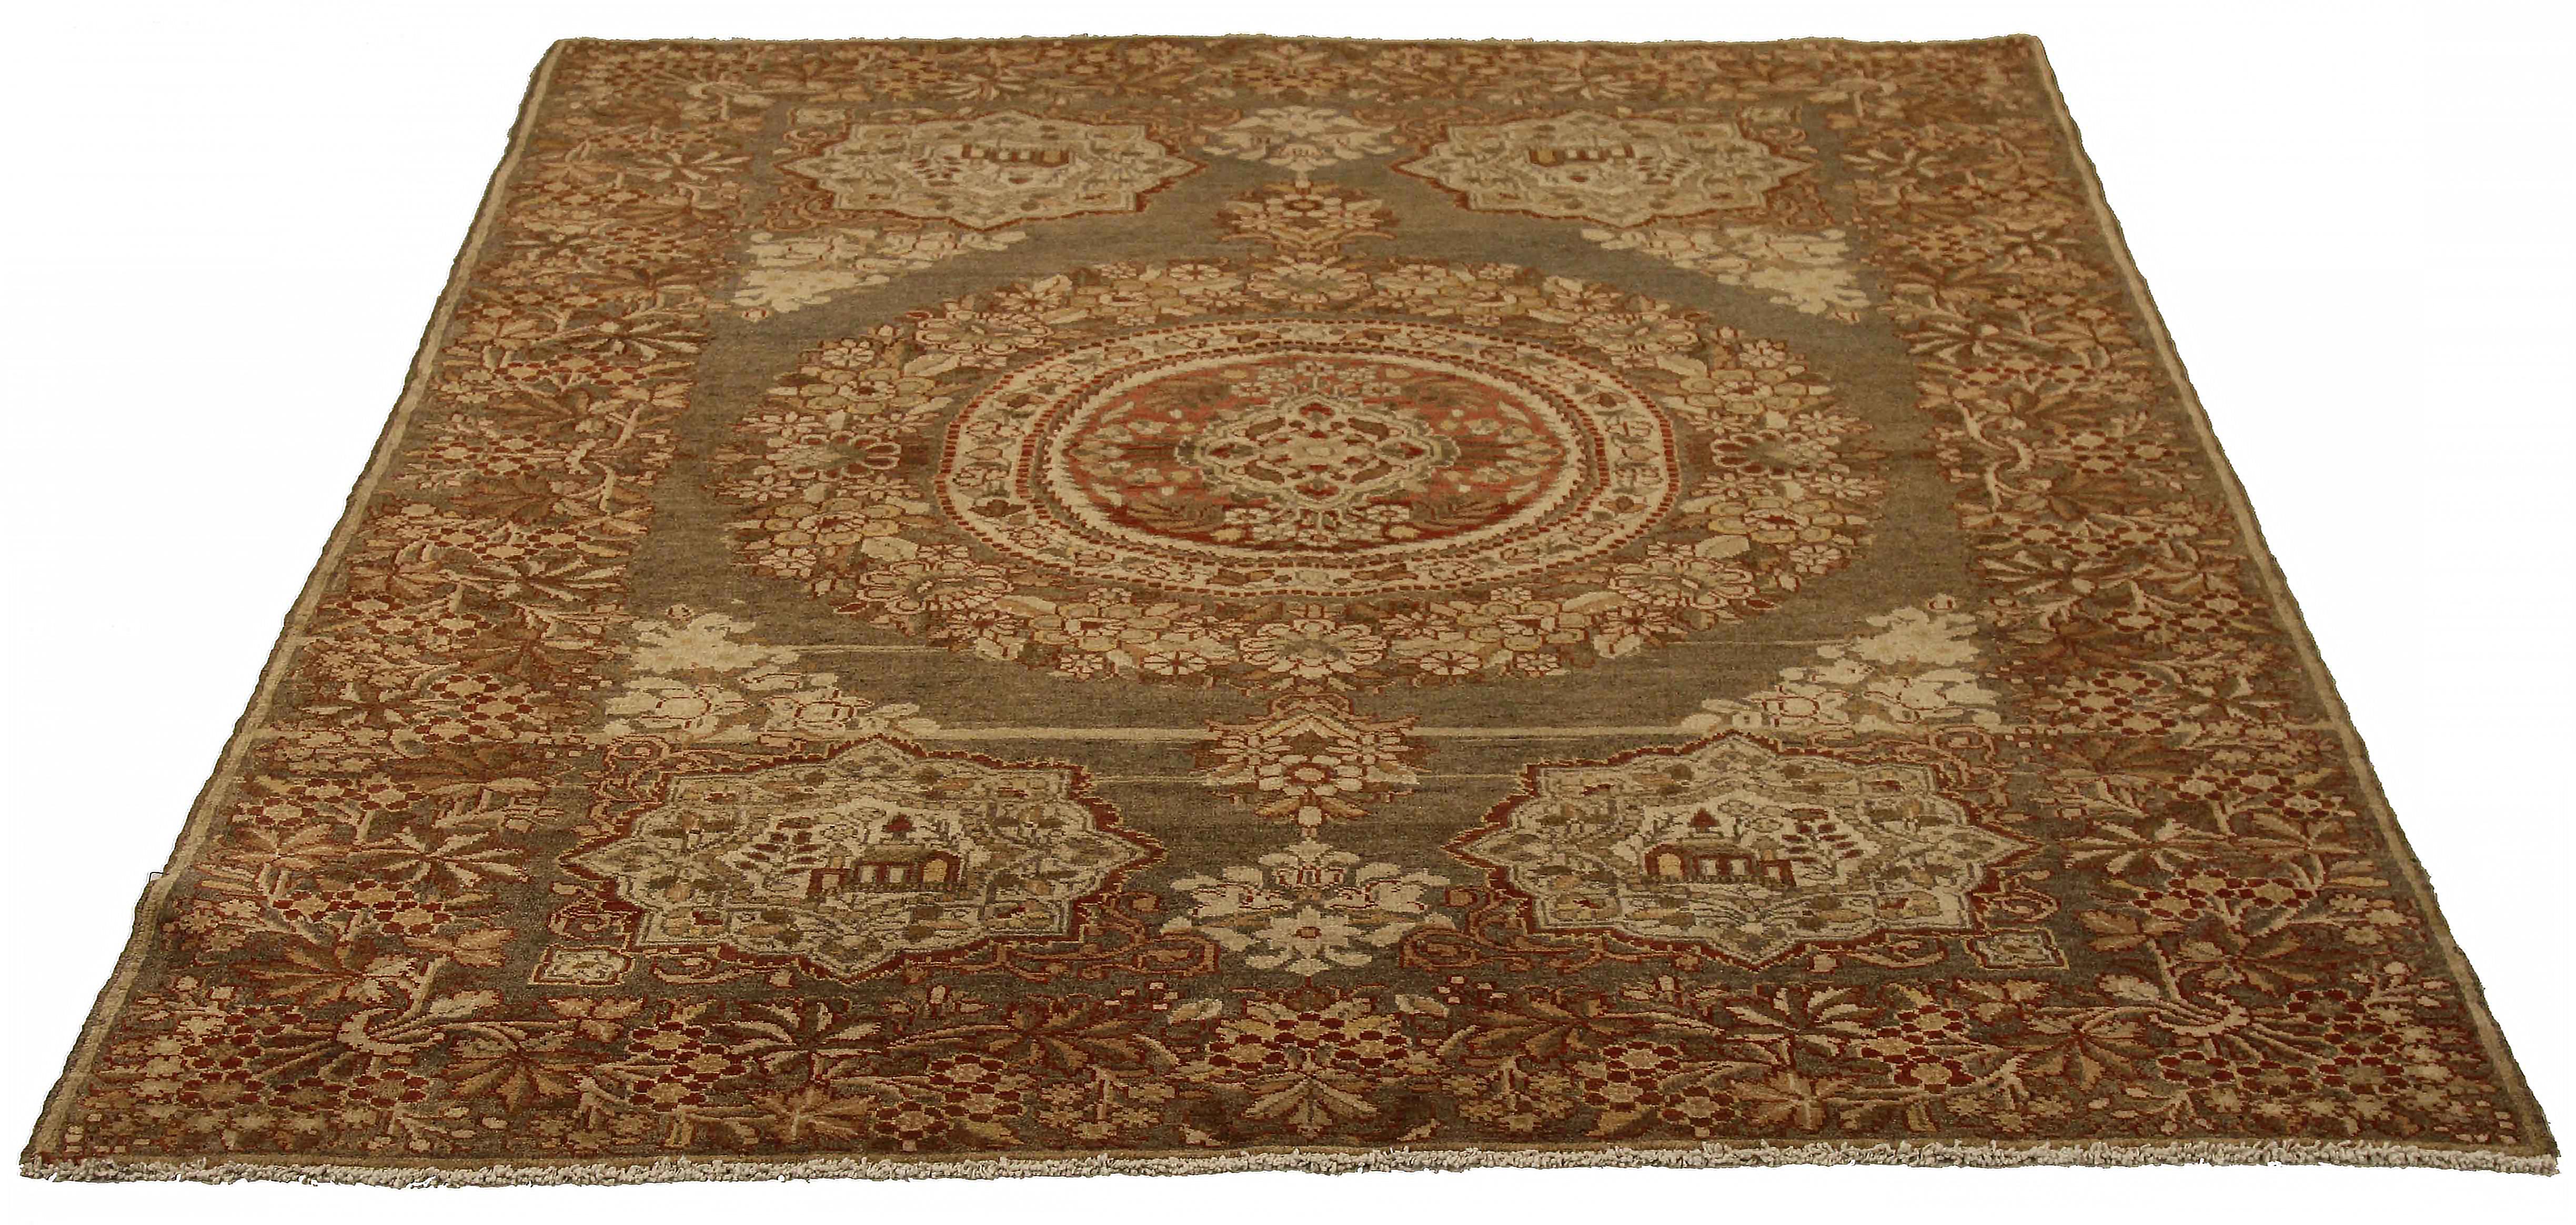 Antique Persian rug handwoven from the finest sheep’s wool. It’s colored with all-natural vegetable dyes that are safe for humans and pets. It’s a traditional Malayer design featuring brown and beige floral details over an ivory field. It’s a lovely